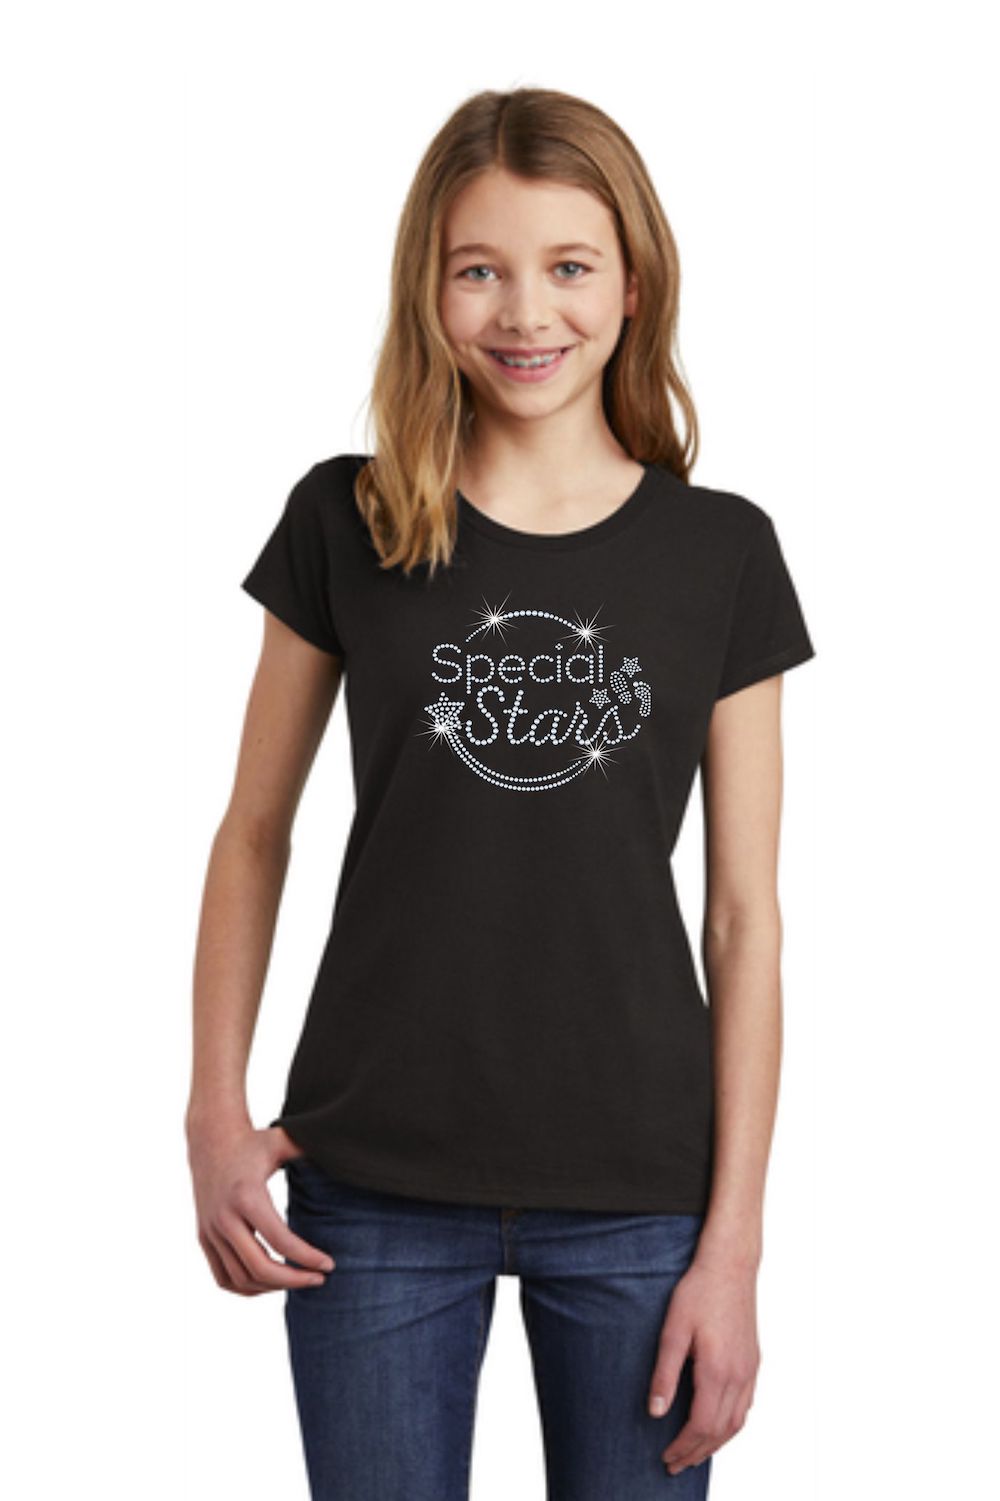 Special Stars Ladies and Girls Size Crewneck T-Shirt